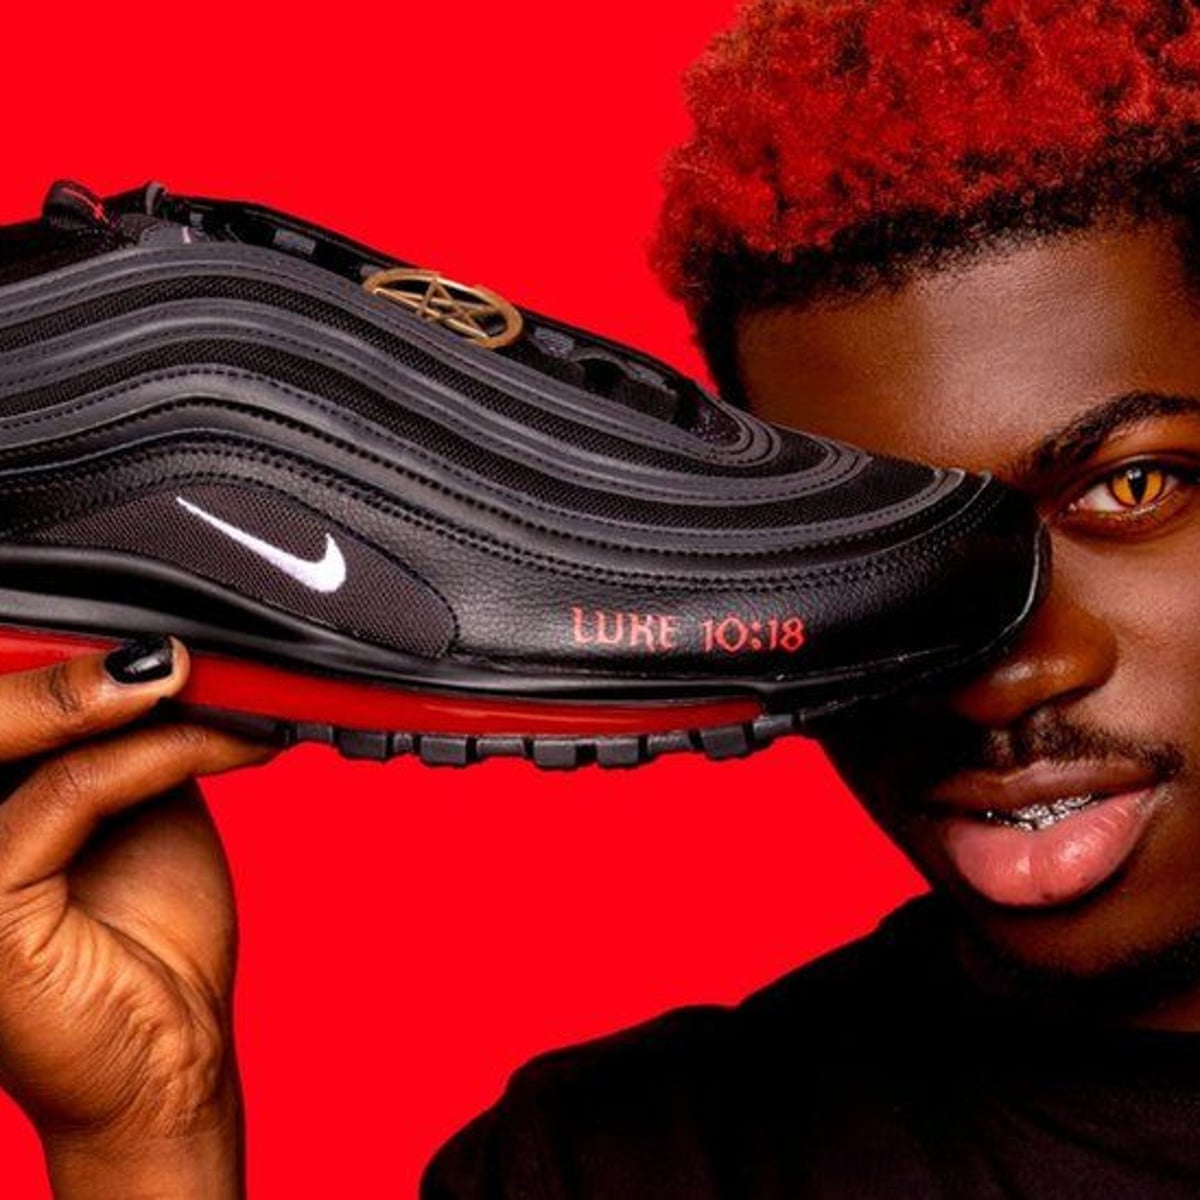 Harmonisch huiswerk Productiviteit Maker of Lil Nas X 'Satan shoes' blocked by Nike insists they are works of  art | Fashion | The Guardian